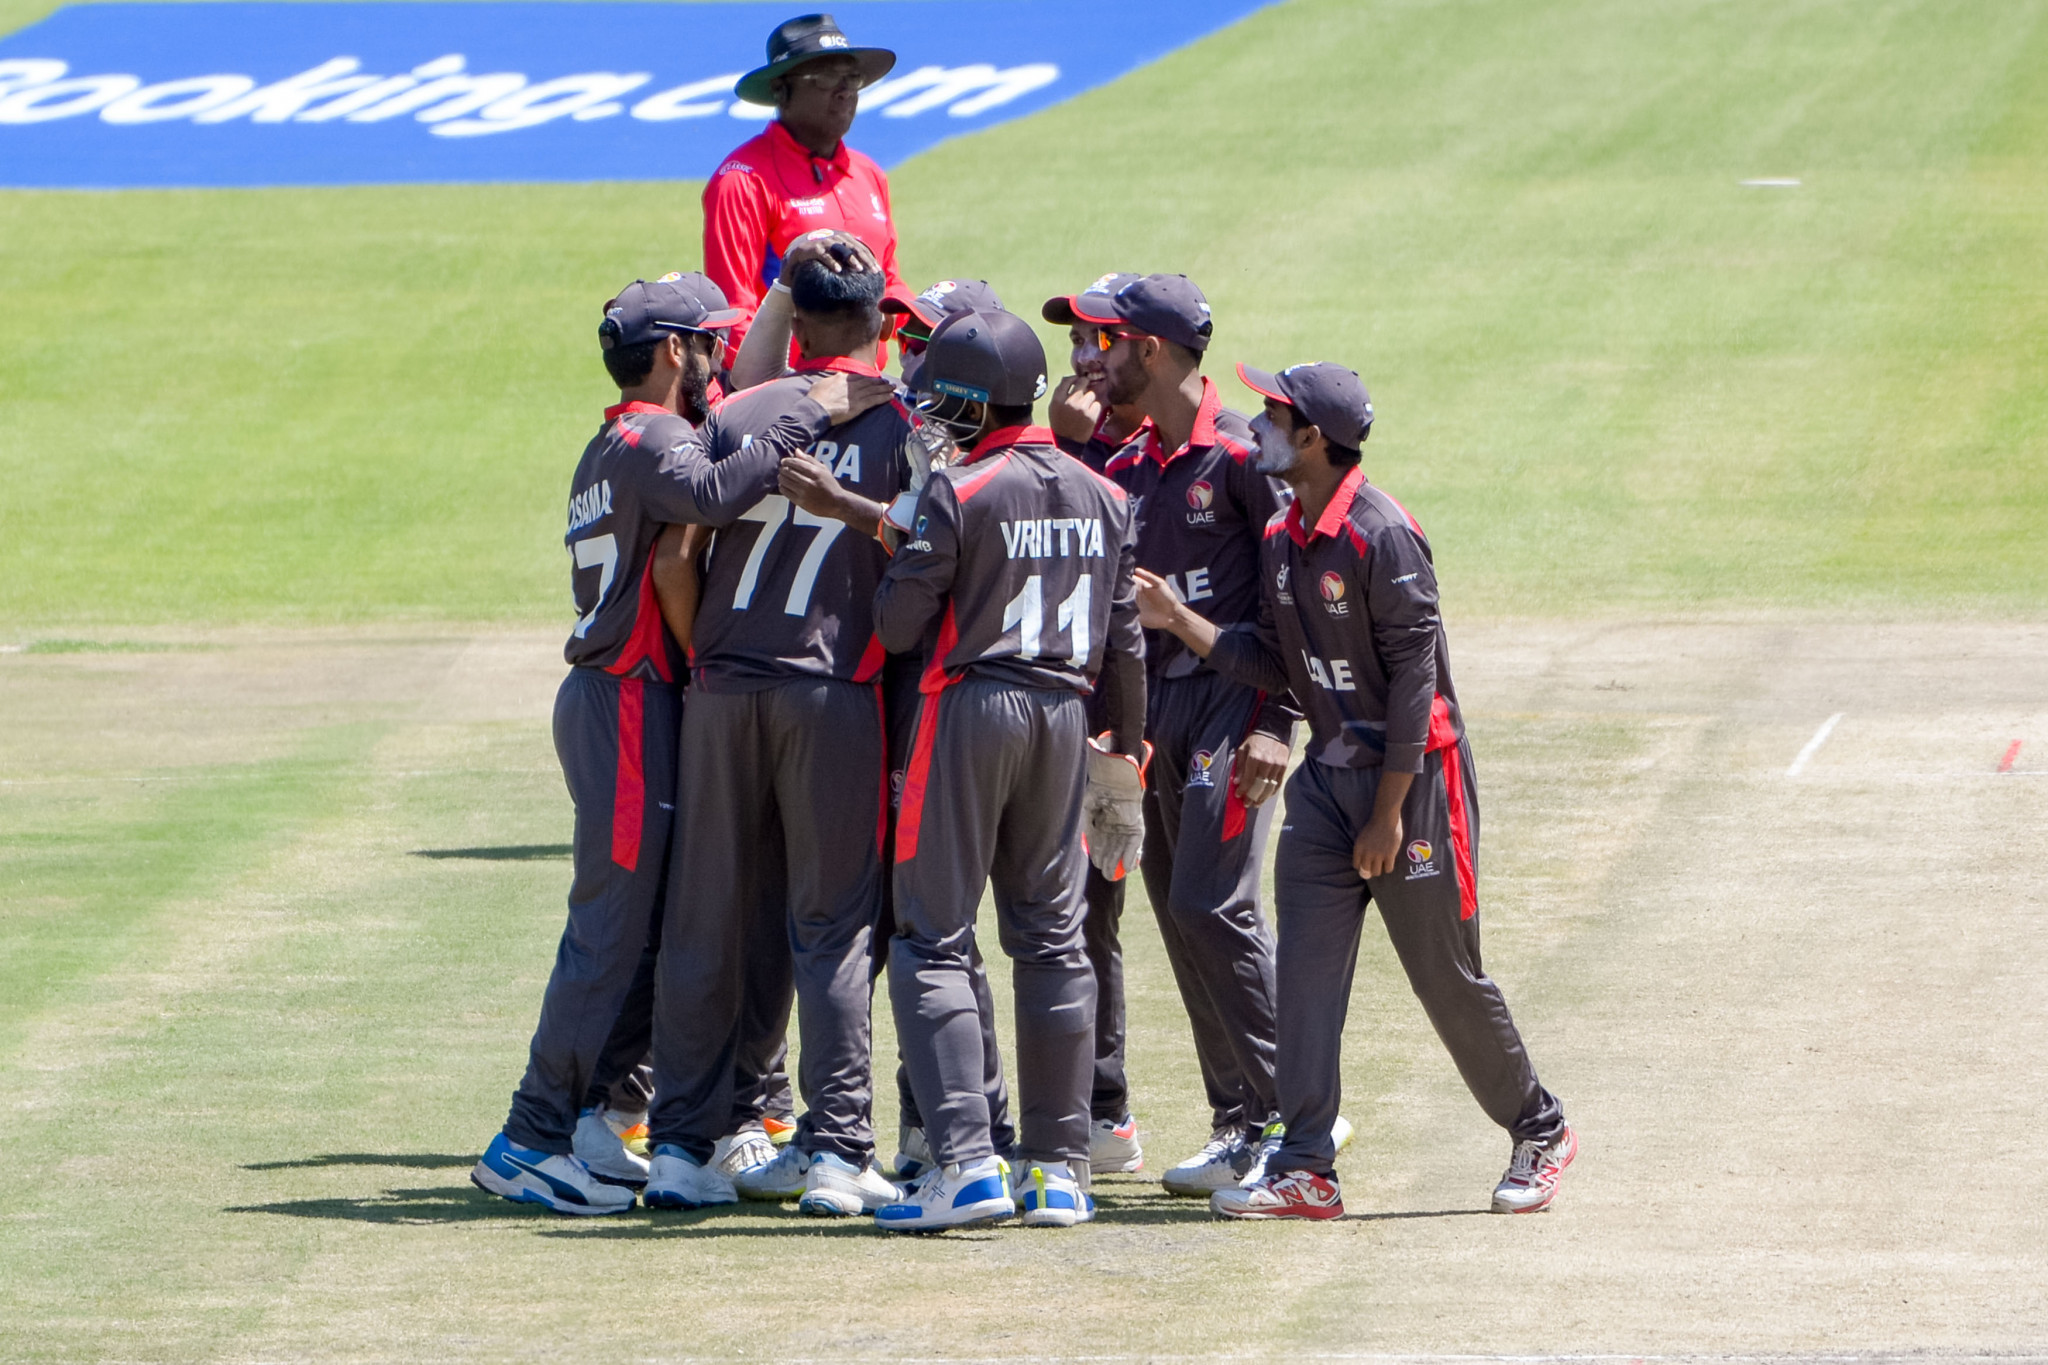 UAE beat Ireland by seven wickets after qualifying for the ICC T20 World Cup